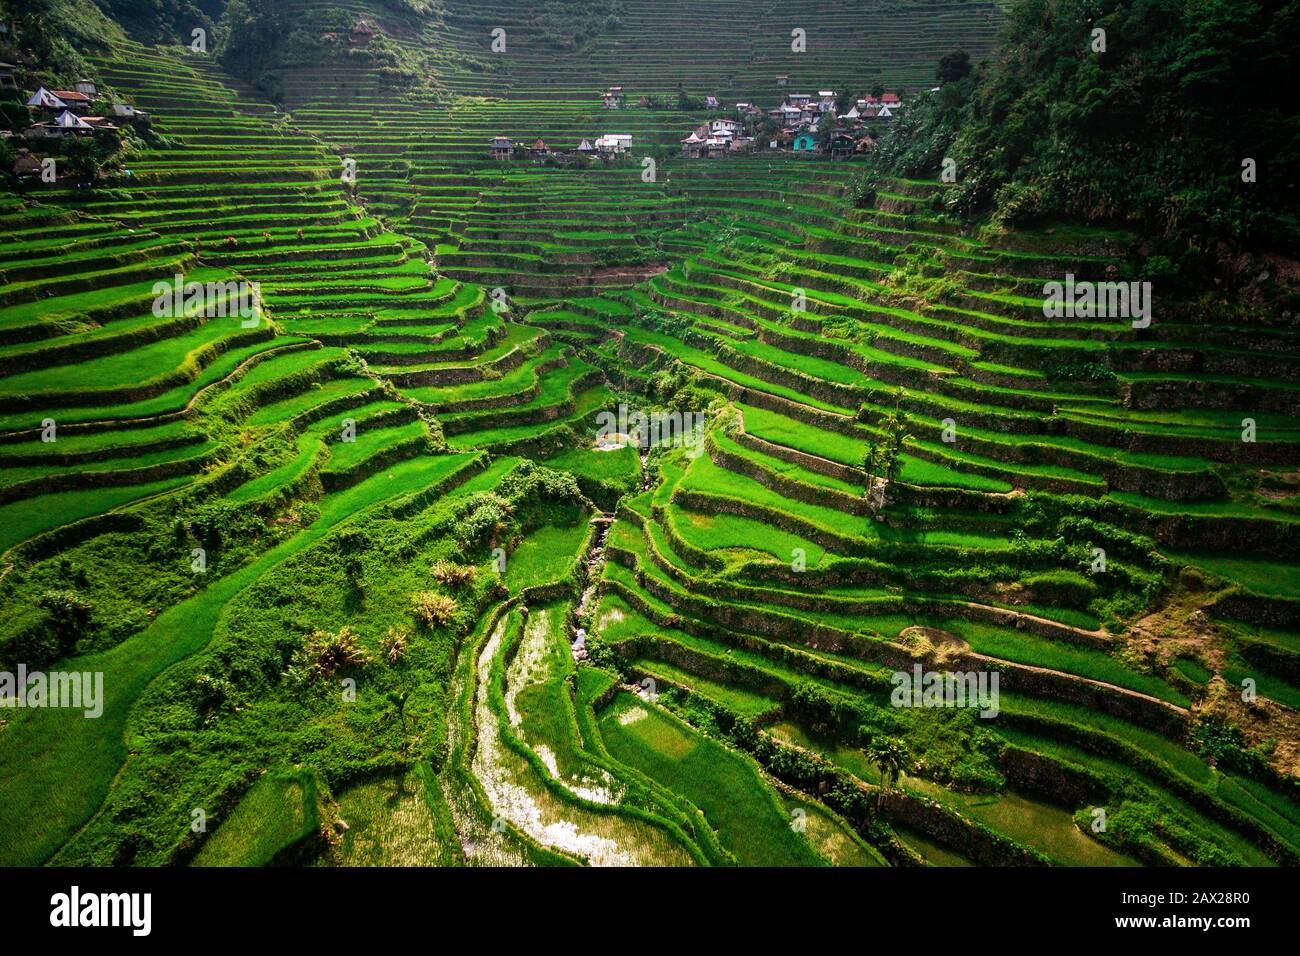 Aerial view of Batad Rice Terraces in Ifugao Province, Luzon Island, Philippines. Stock Photo